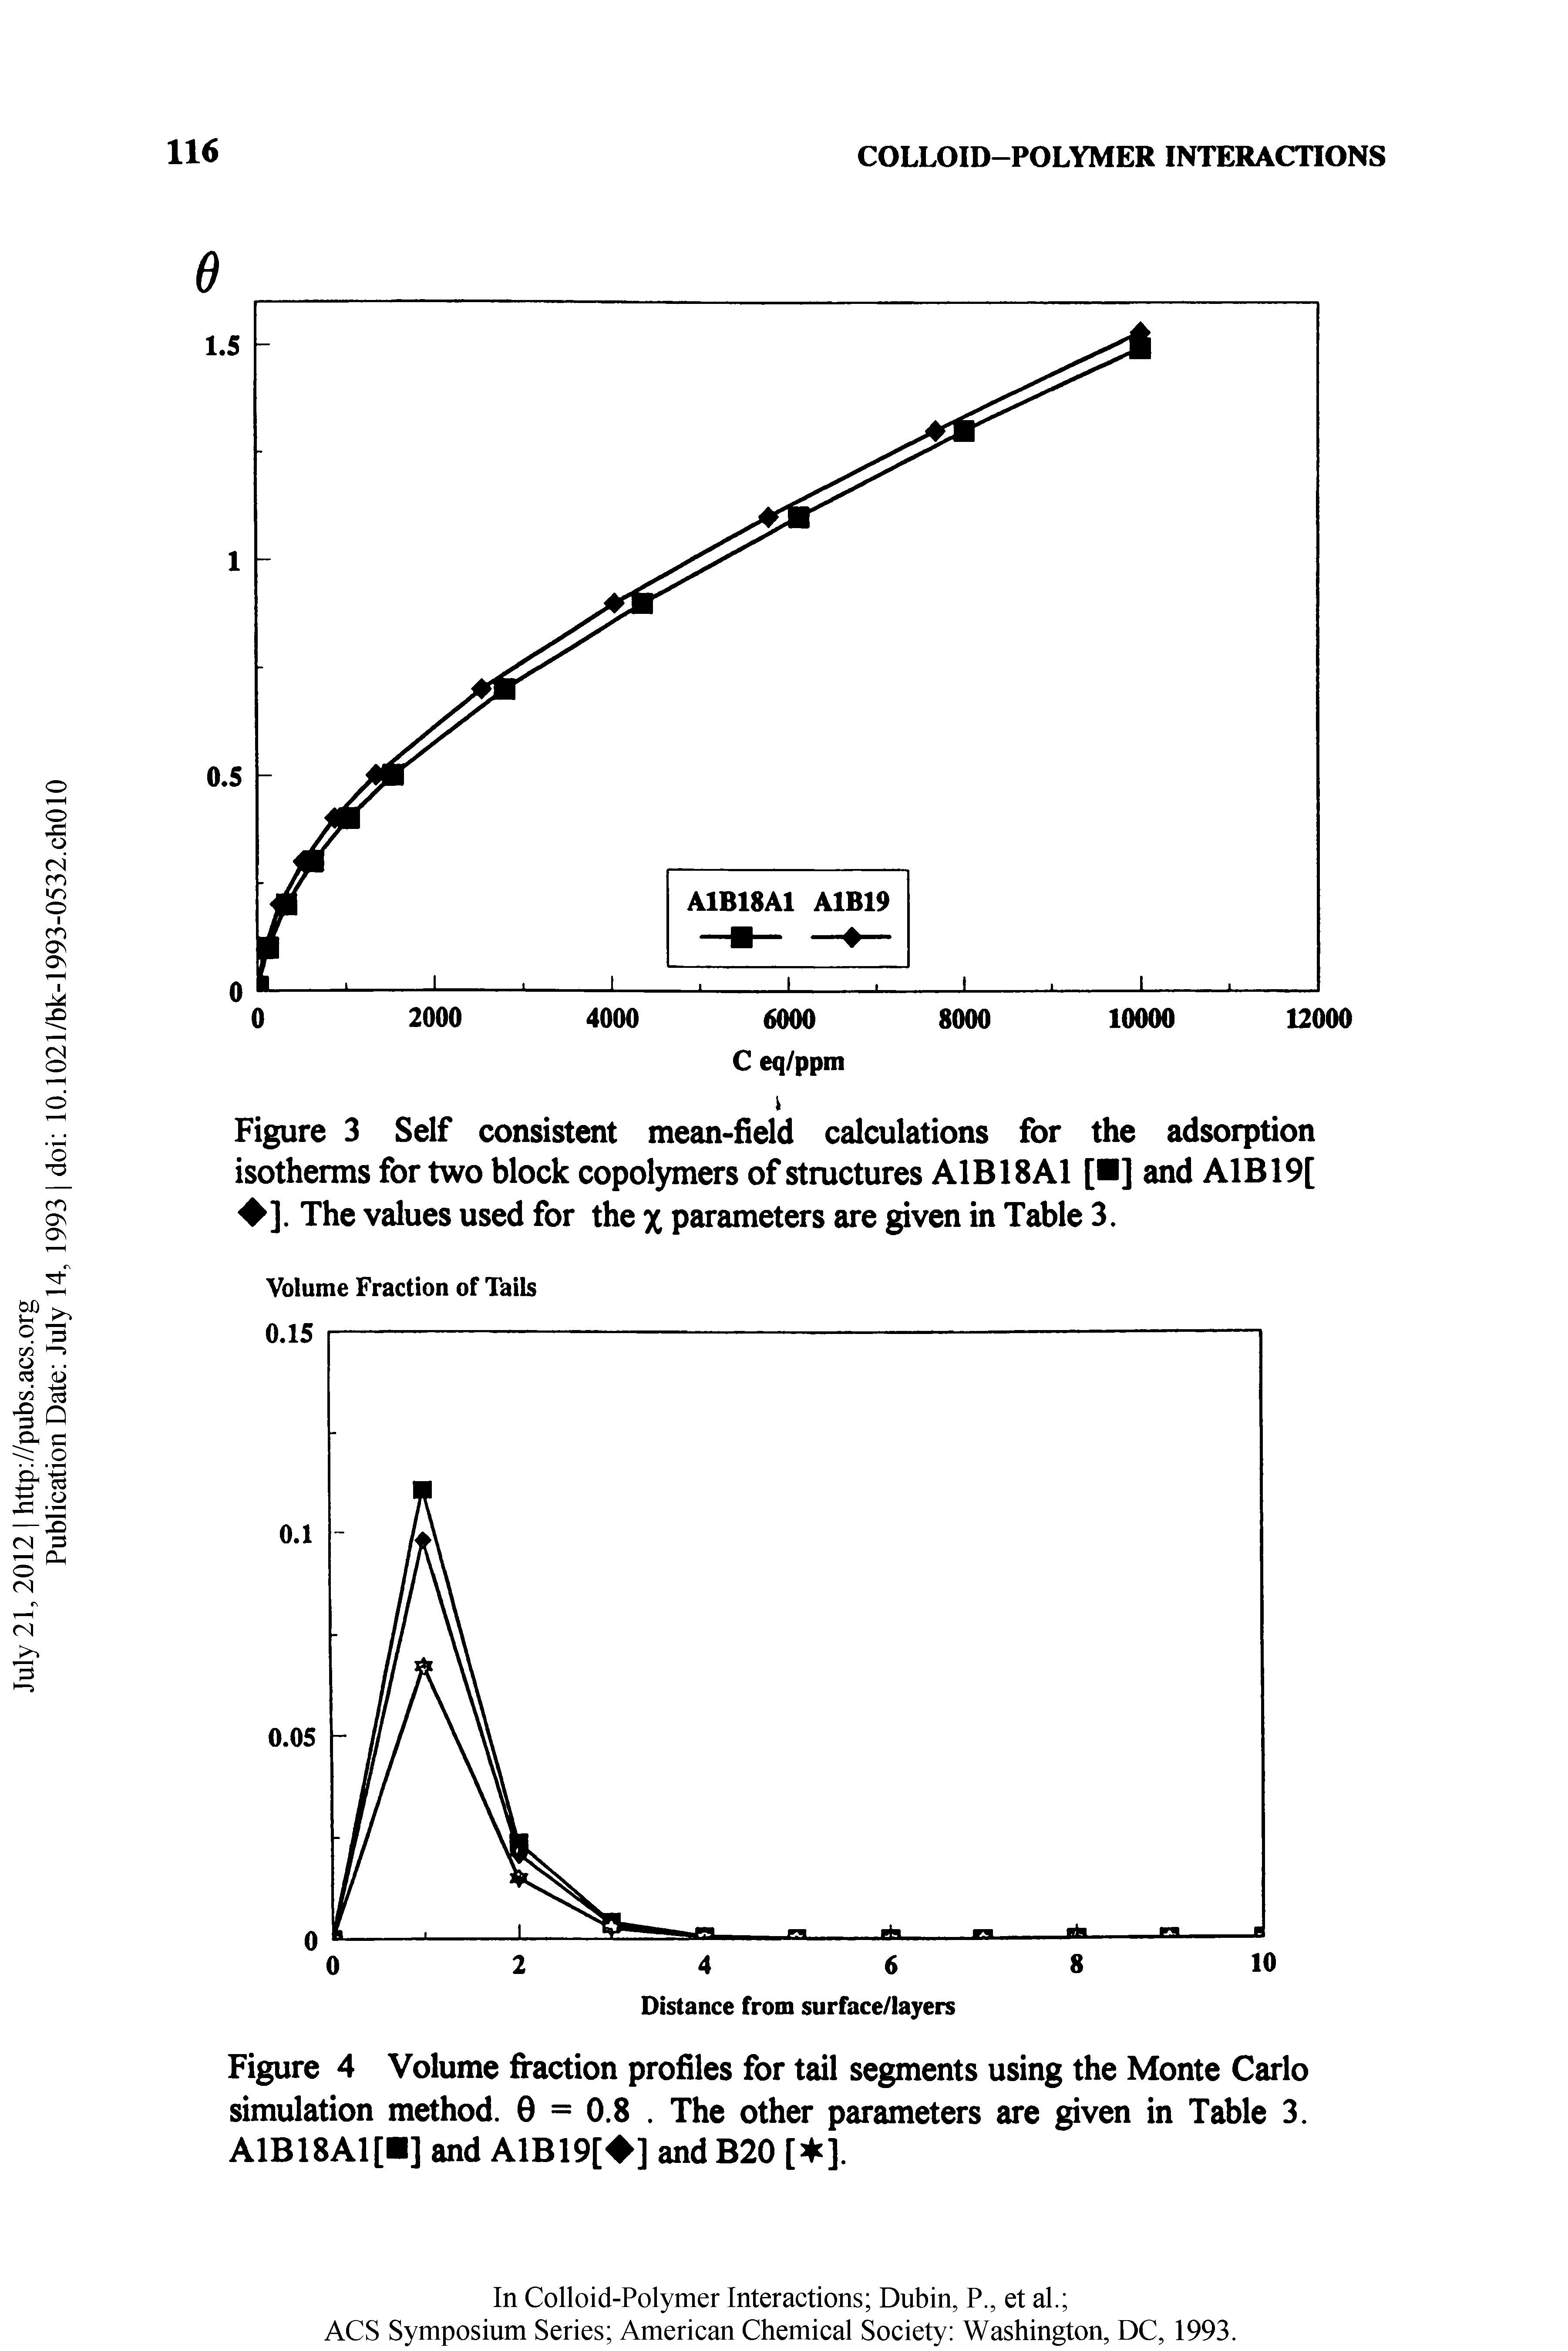 Figure 4 Volume fraction profiles for tail segments using the Monte Carlo simulation method. 0 = 0.8. The other parameters are given in Table 3. A1B18A1[B] and A1B19[ ] and B20 [4 ].